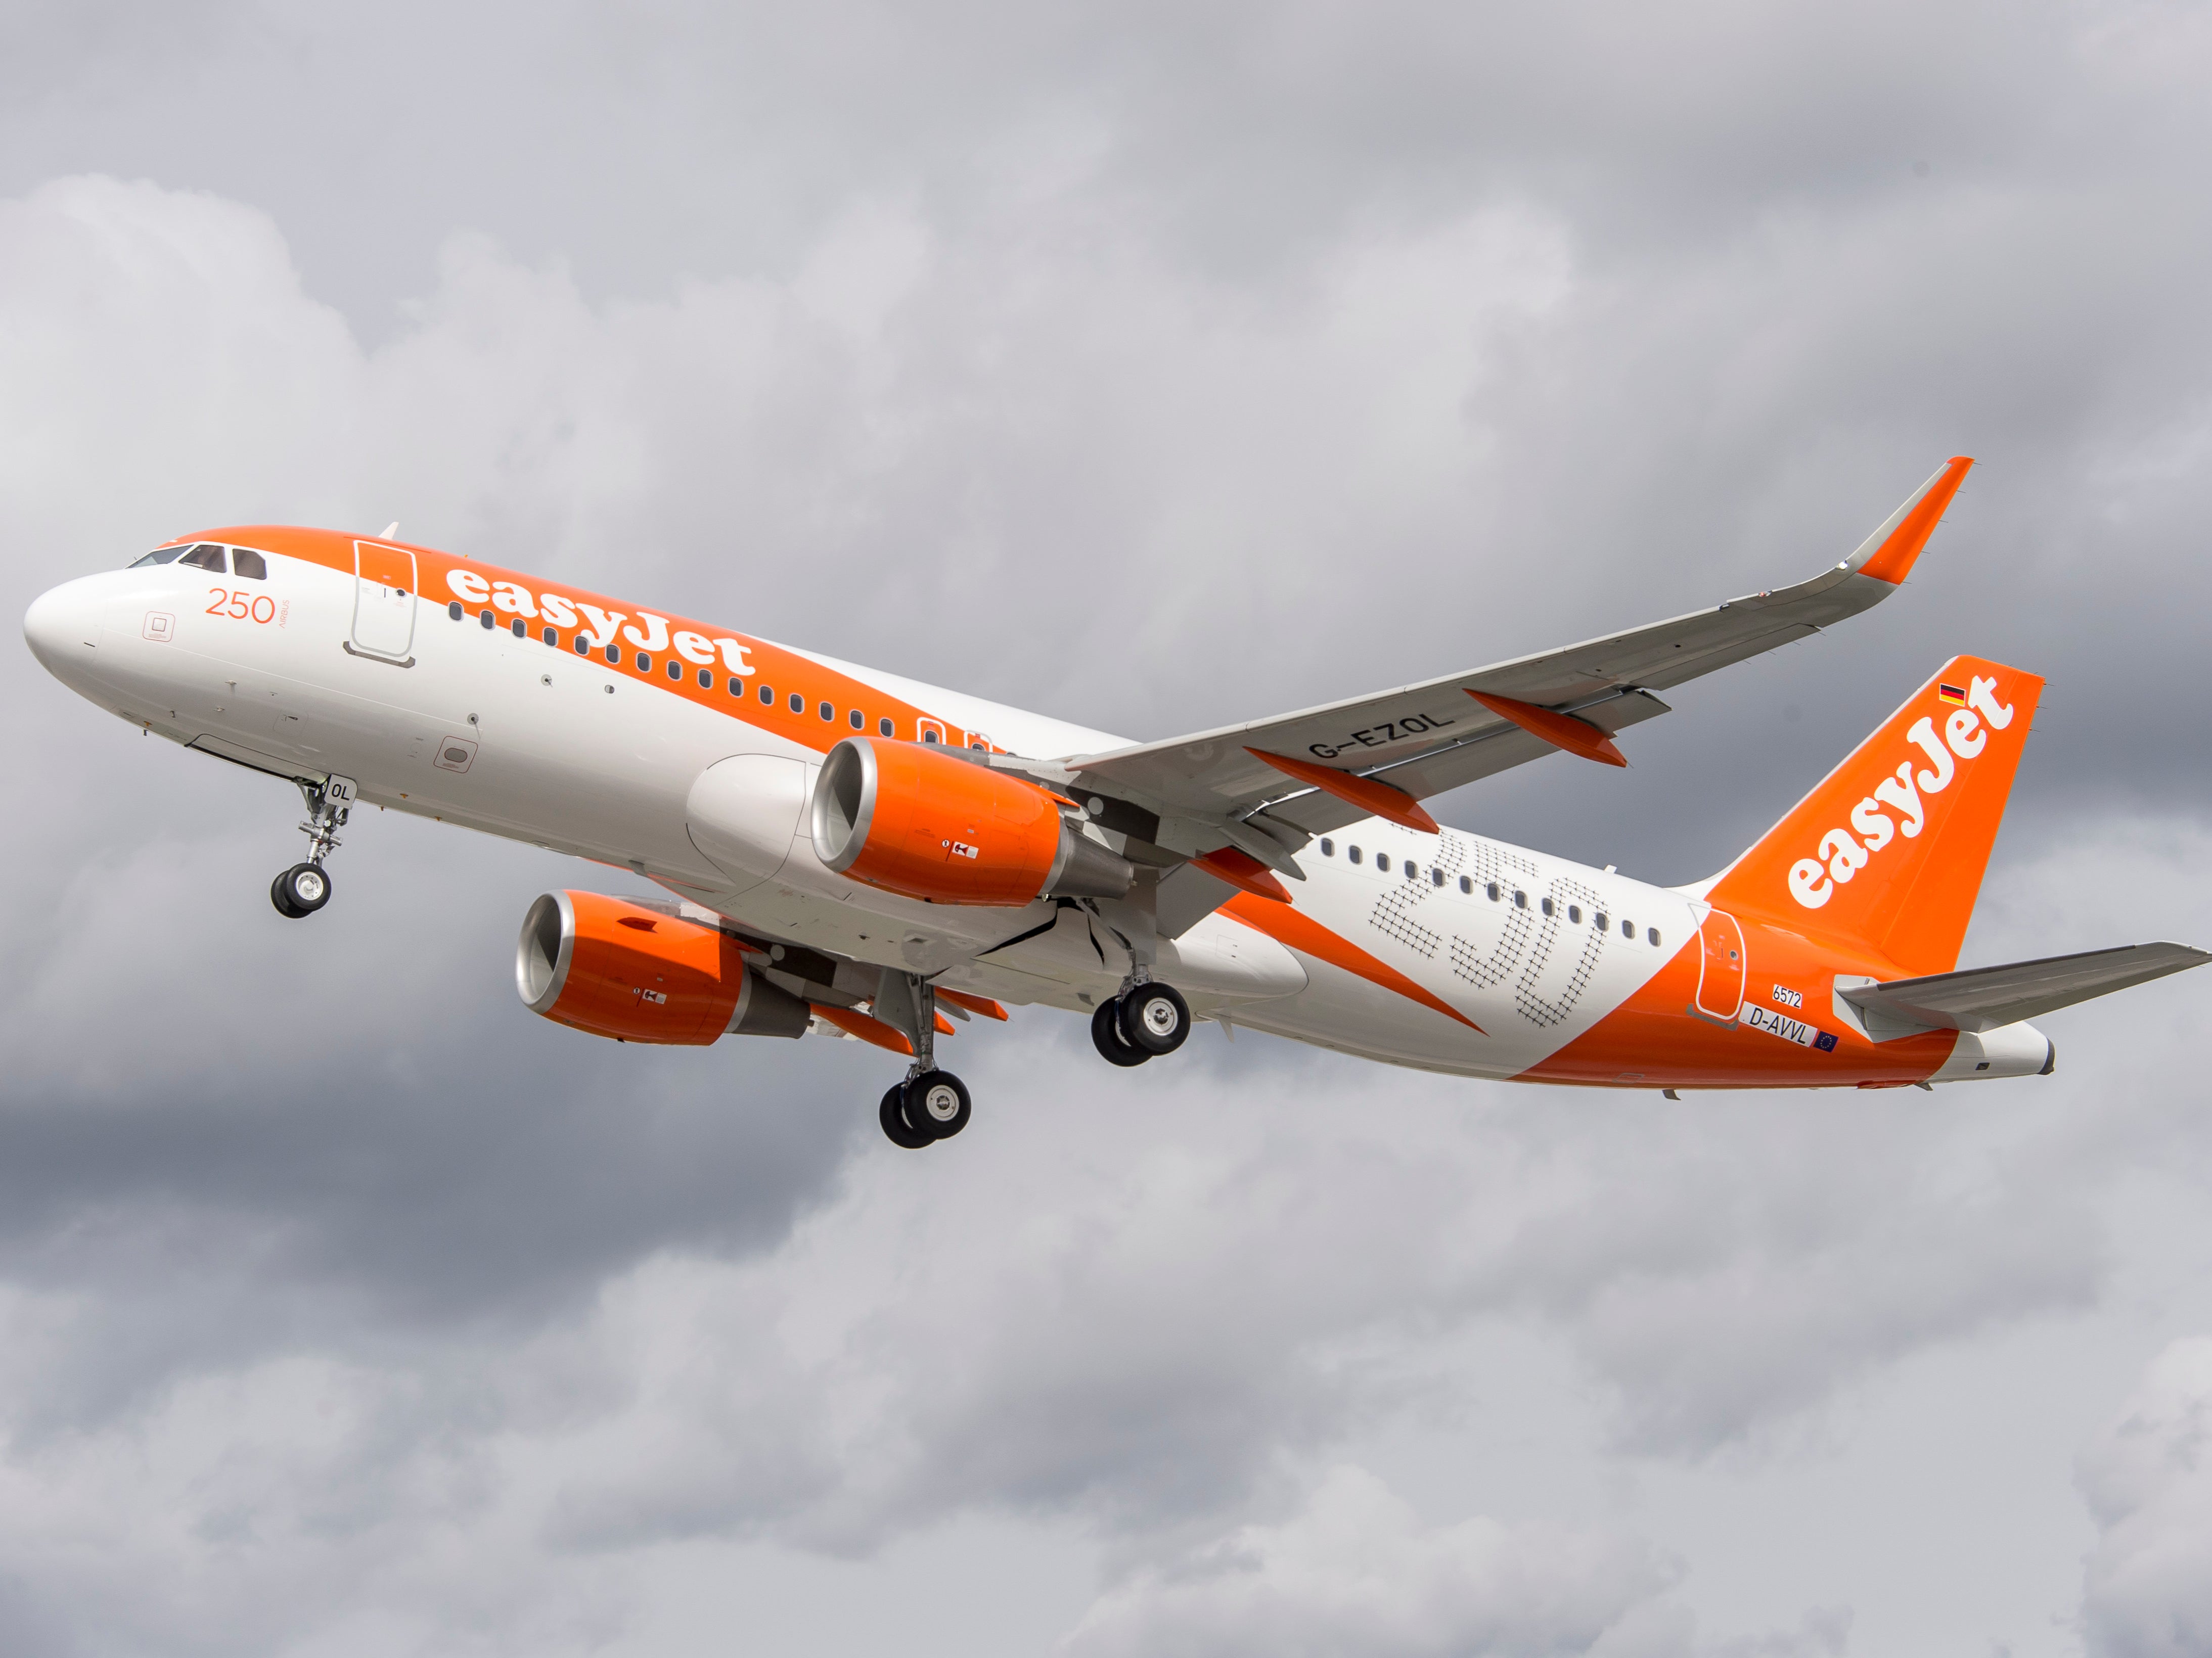 New horizons: easyJet has announced 10 more routes from the UK for winter 2021-22